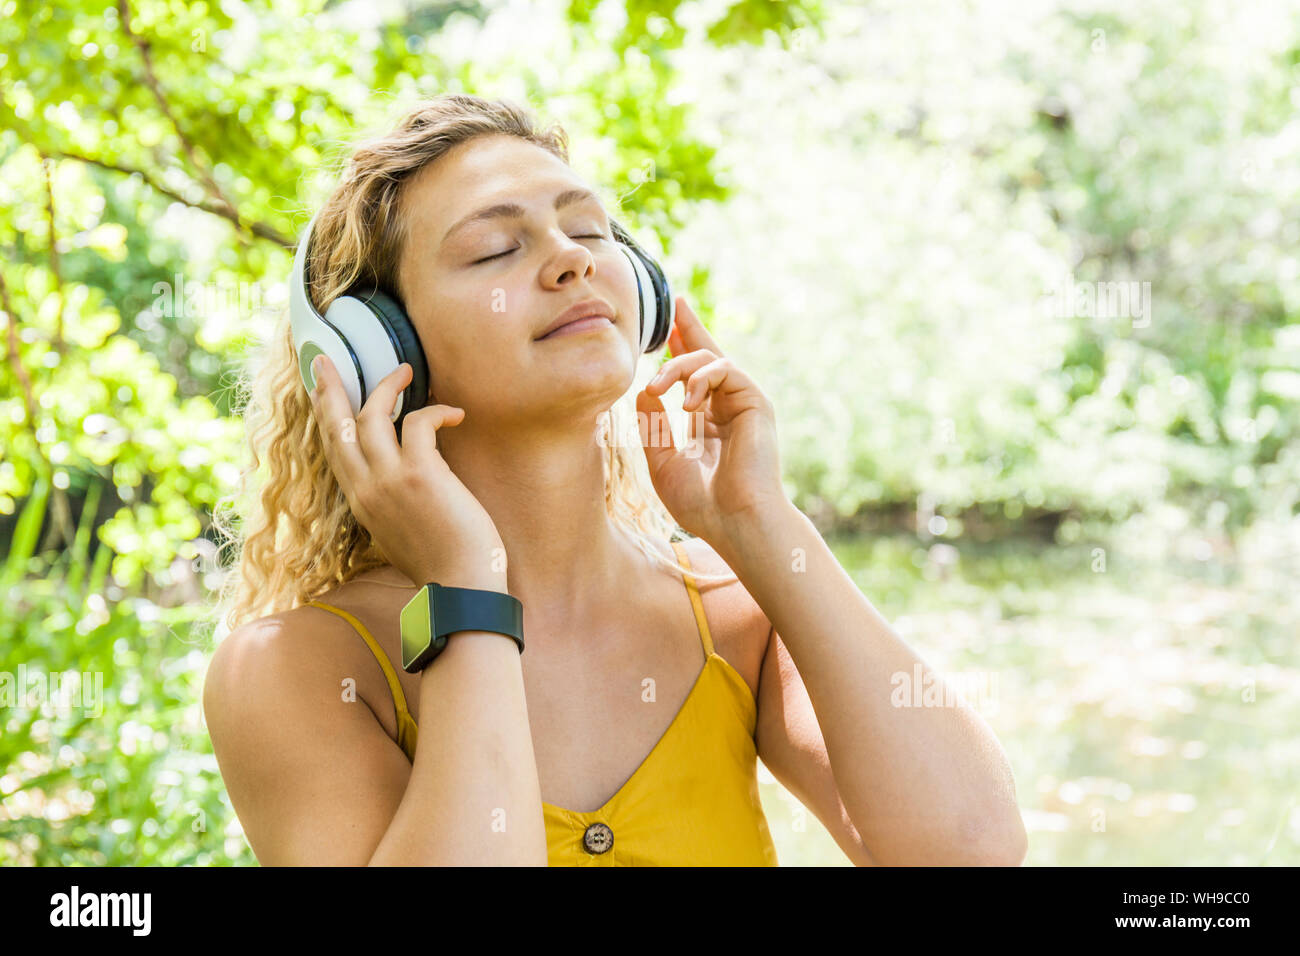 Smiling woman with closed eyes listening to music at lakeside Stock Photo